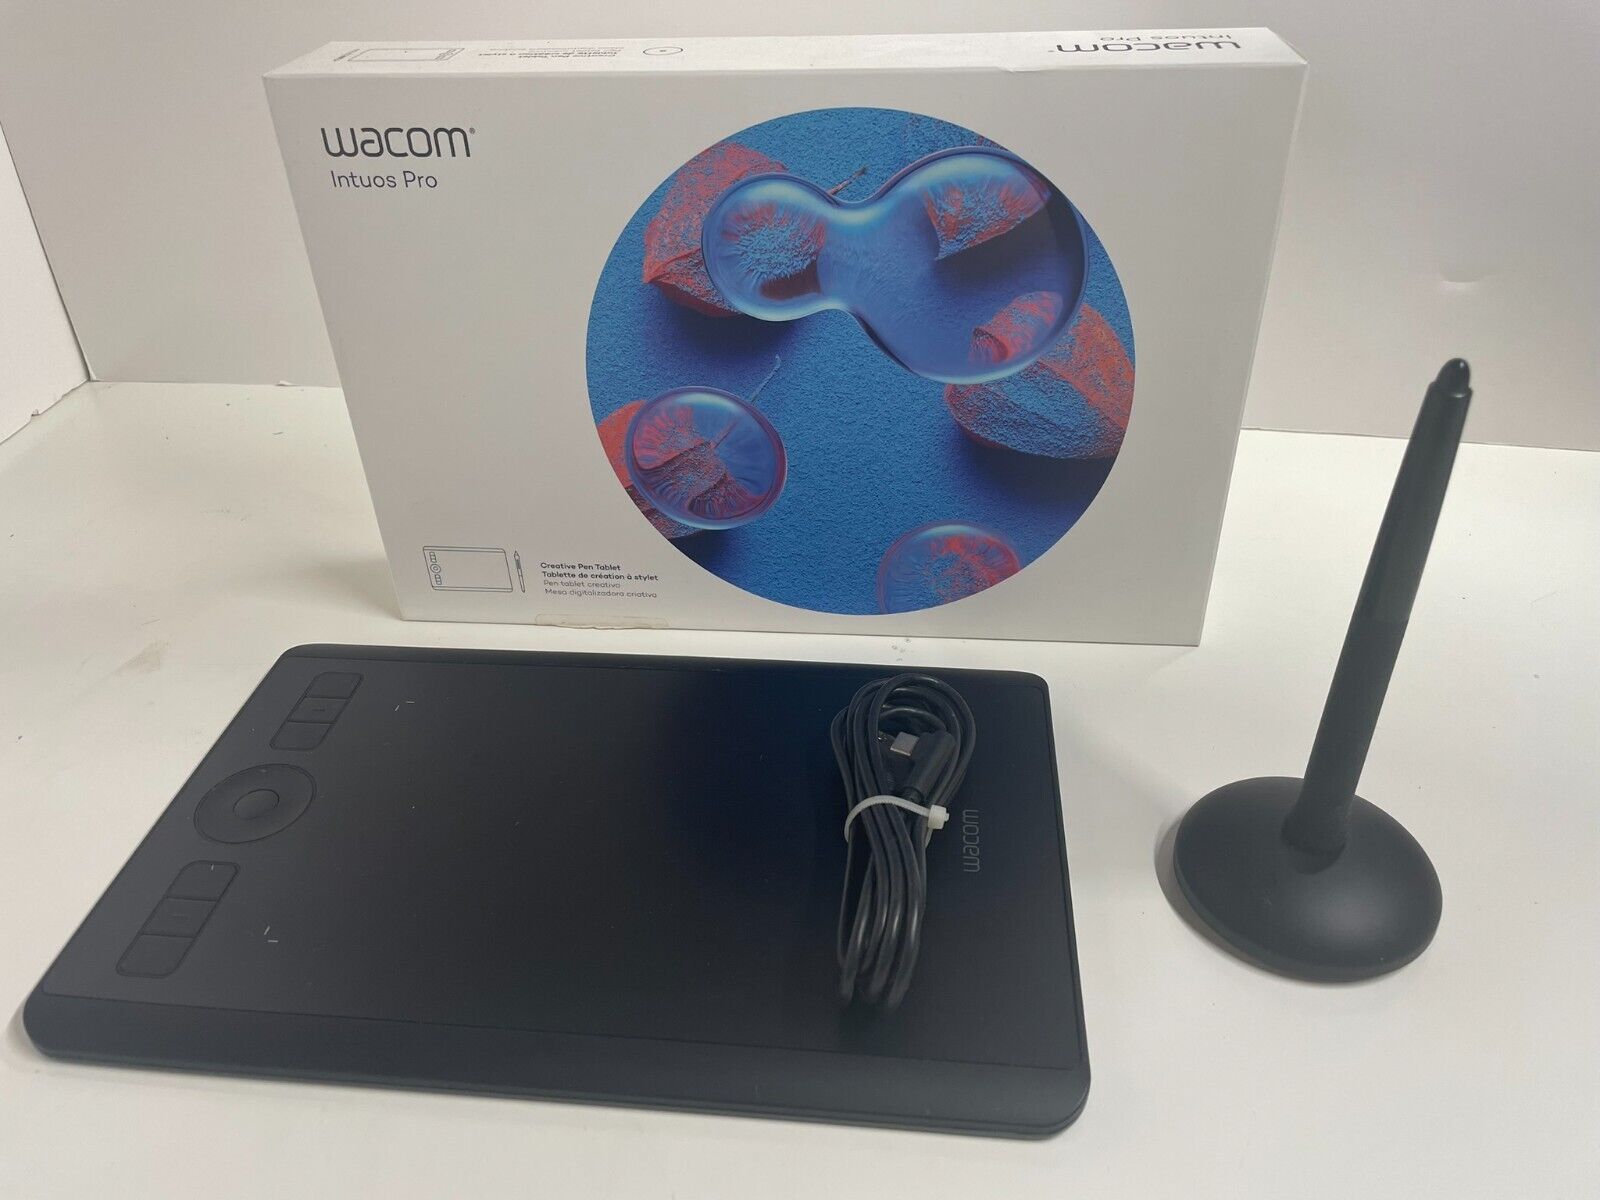 Wacom Intuos Pro Small Digital Graphic Drawing Tablet, SHPTH460K0A, Used